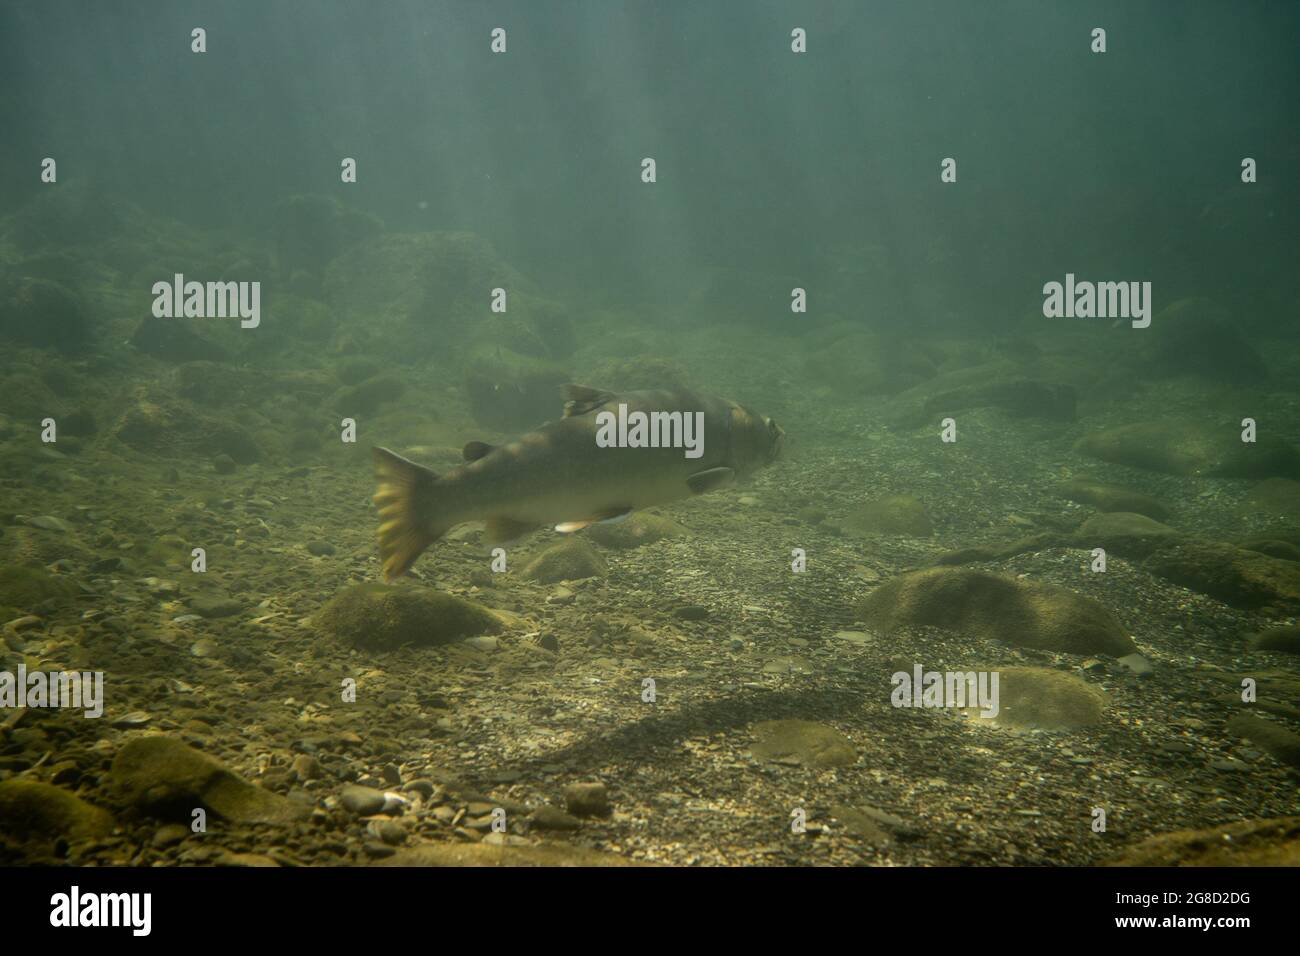 A bull trout holding on a deeper pool in the headwaters of the Pine River, in Chewynd, British Columbia, Canada. Stock Photo